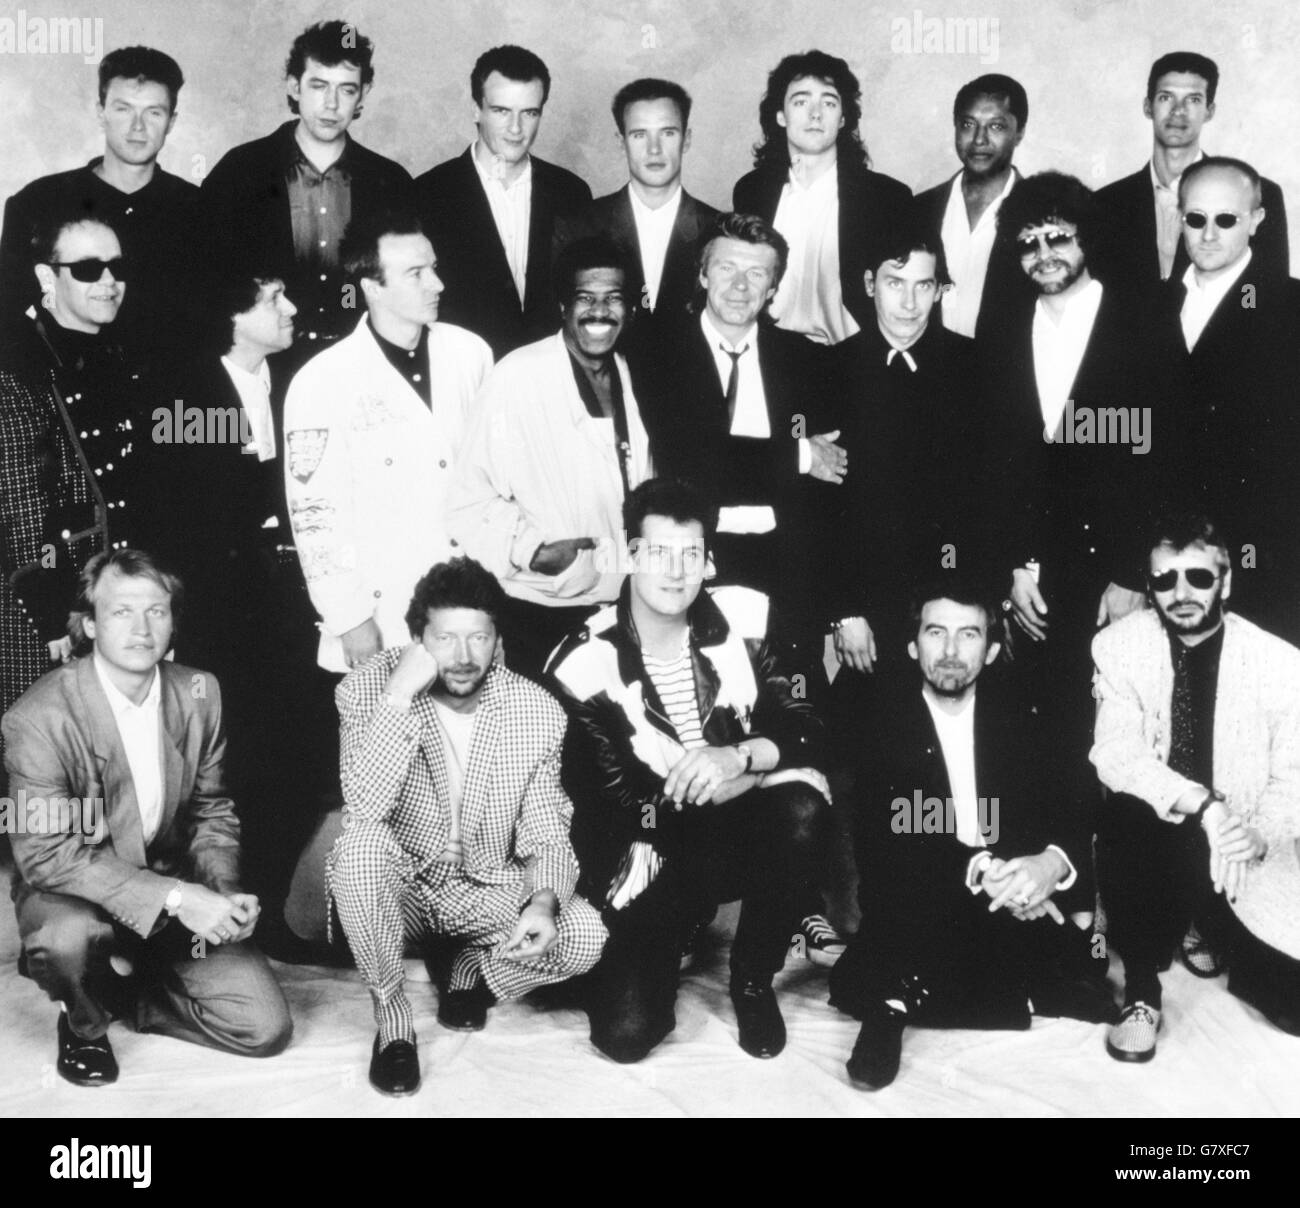 The pop stars who performed in the Prince's Trust Rock Gala at Wembley. Back row (l-r): Gary Kemp, Mark Brezicki, Peter Cox, Alan Murphy, Richard Drummie, Labi Siffre and Mike Lindup. Middle: Elton John, Leo Sayer, Midge Ure, Ben E King, Dave Edmunds, Jools Holland, Jeff Lynne and Ray Cooper. Front: Mark King, Eric Clapton, Tony Hadley, George Harrison and Ringo Starr. Stock Photo